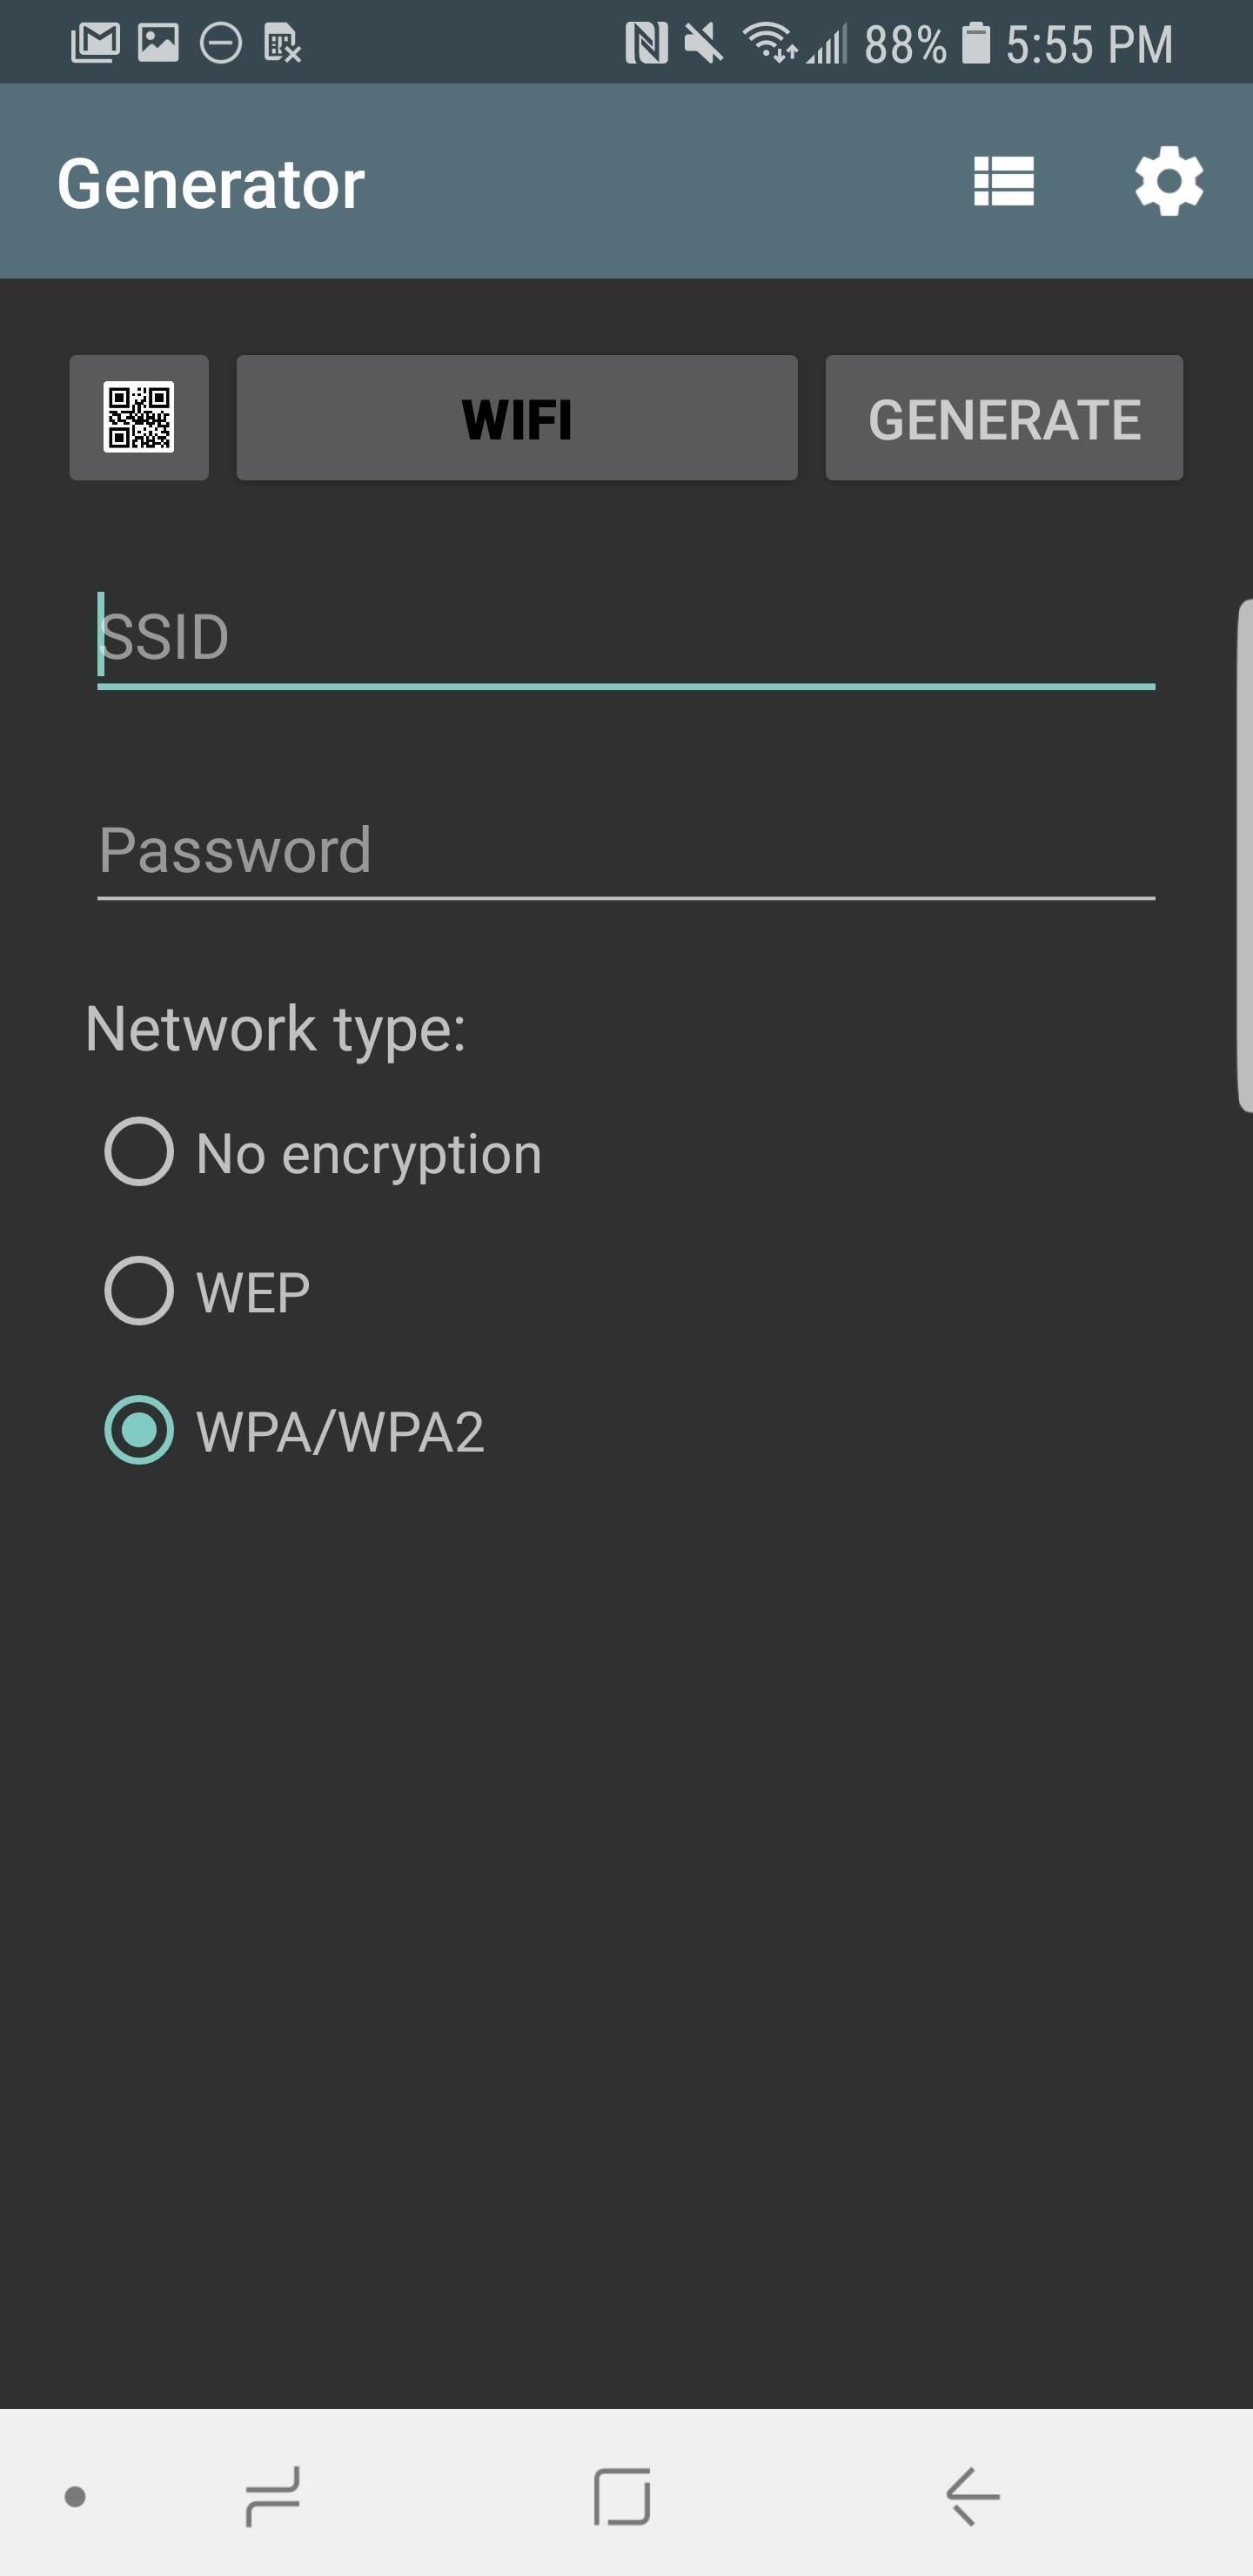 How to Easily Share Your Wi-Fi Password with a QR Code on Your Android Phone